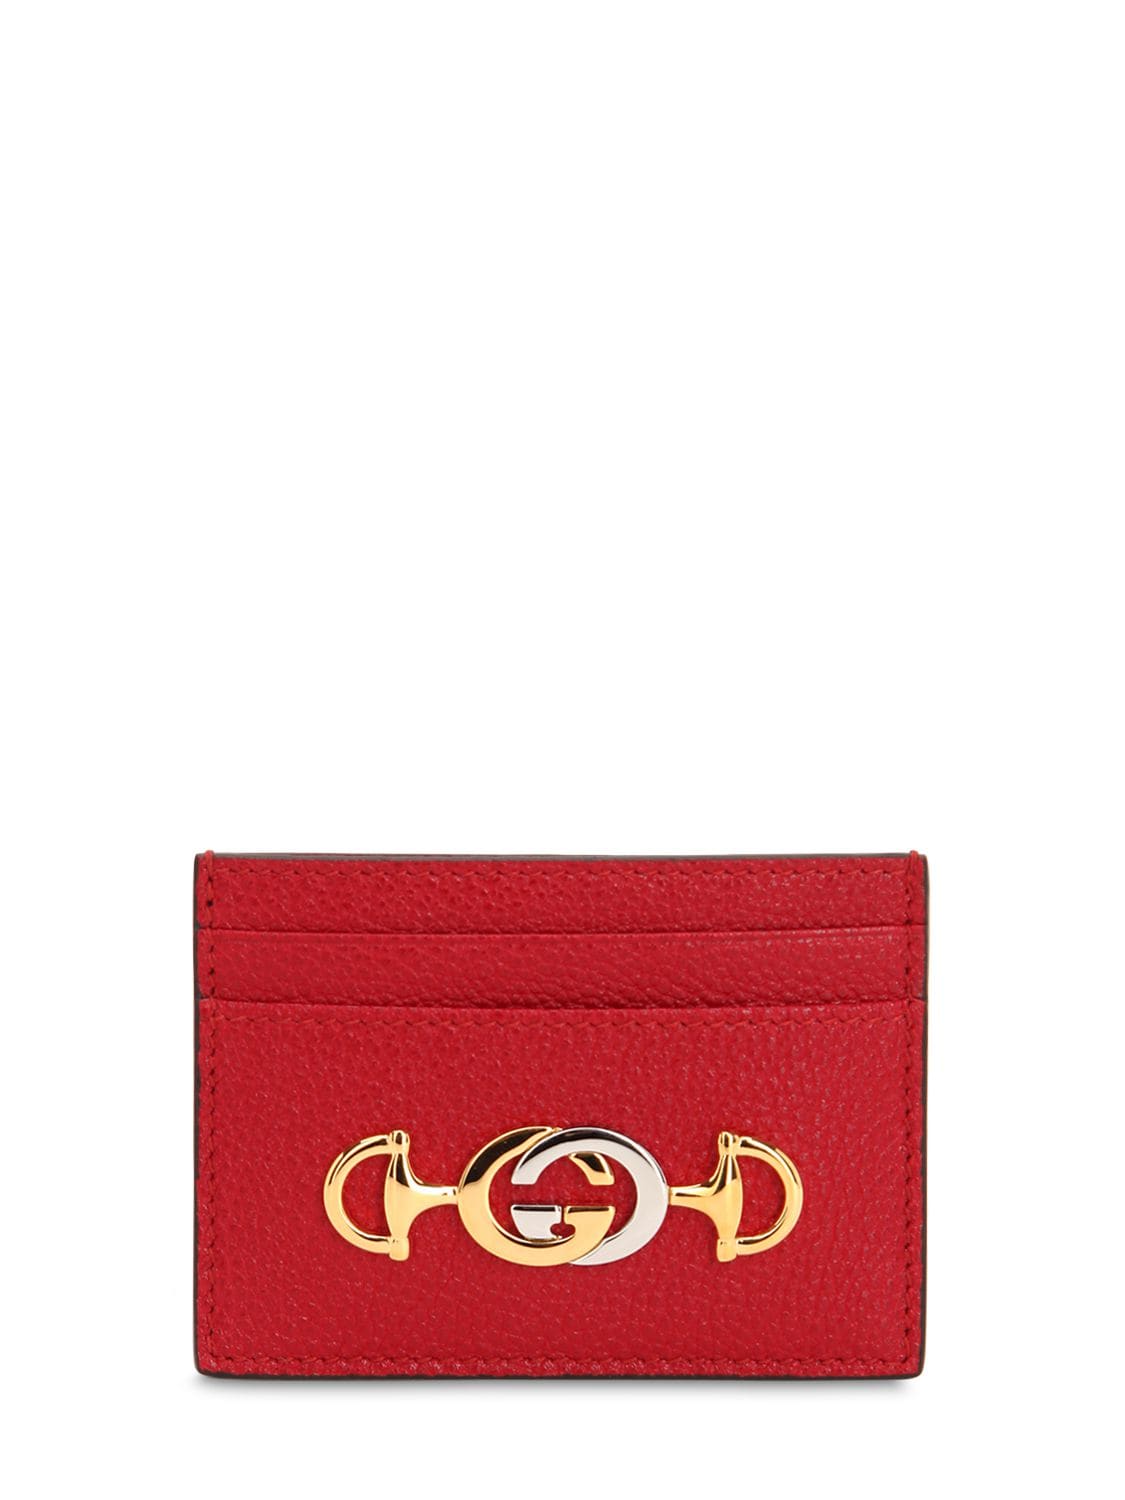 Gucci Zumi Leather Card Holder In Hibiscus Red